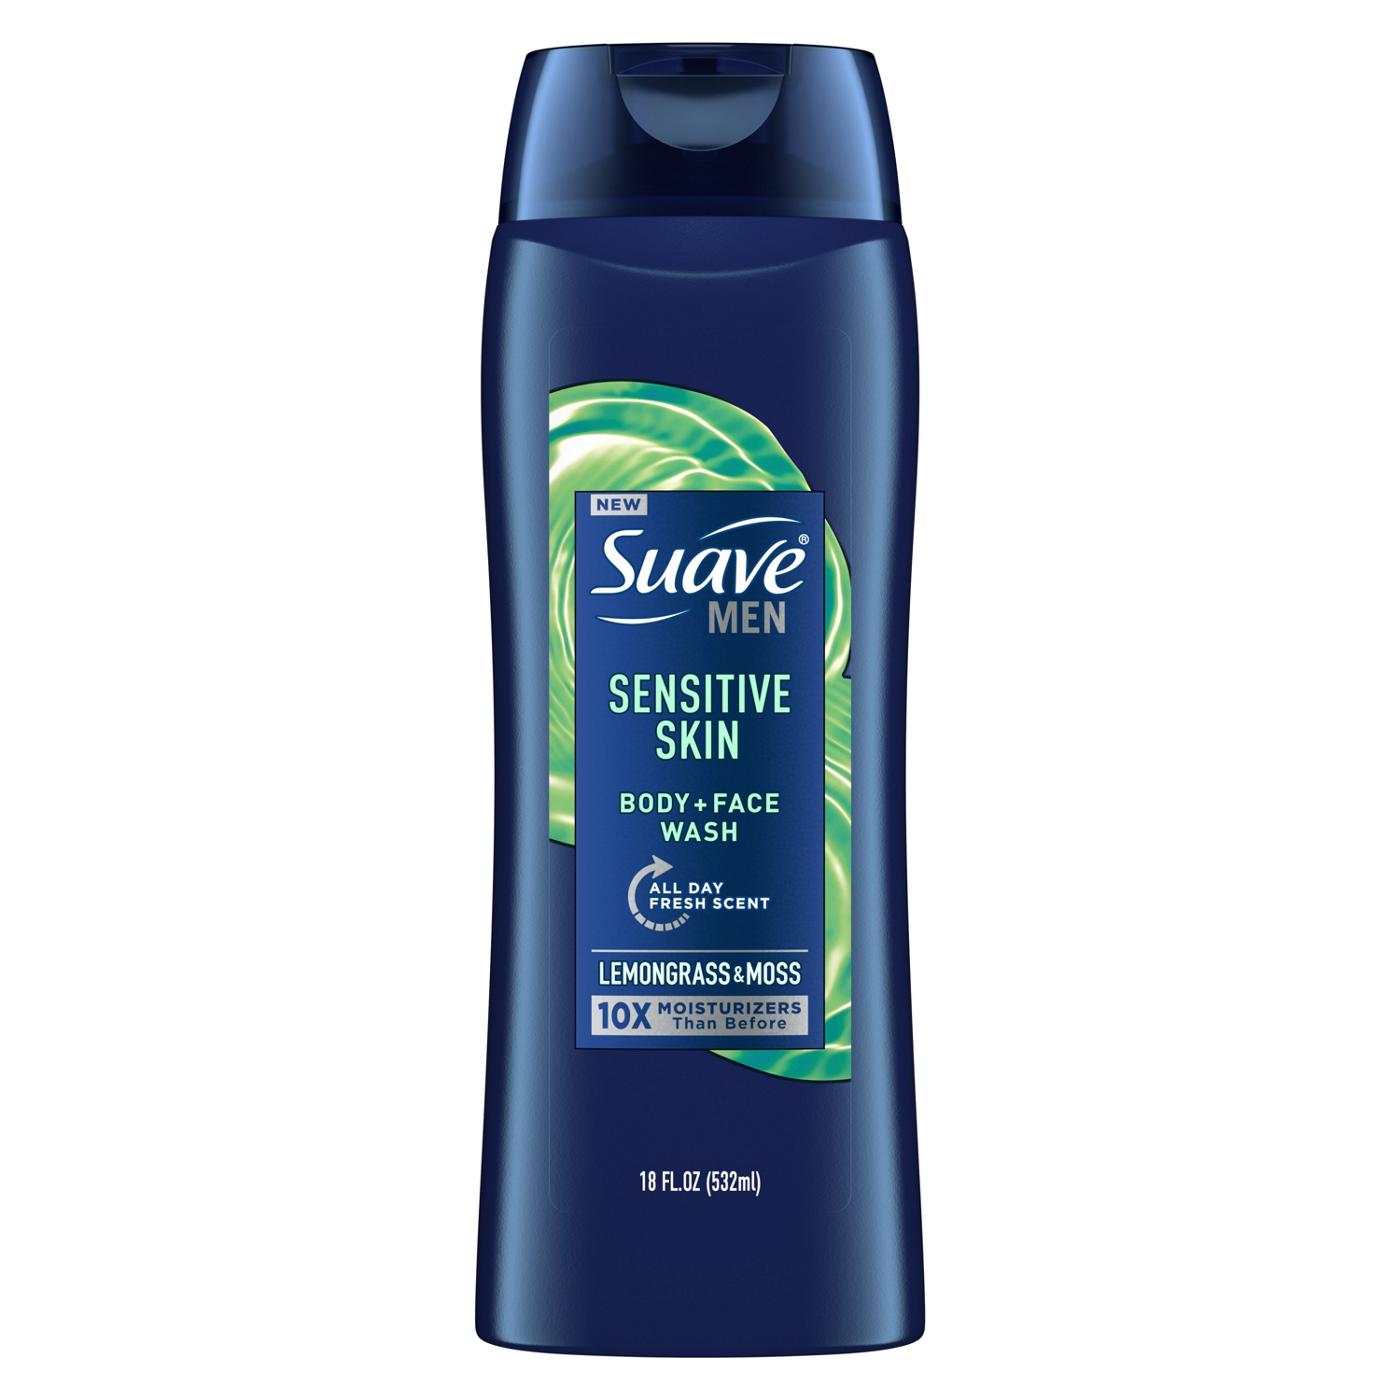 Suave Men Face and Body Wash - Sensitive Skin; image 1 of 6